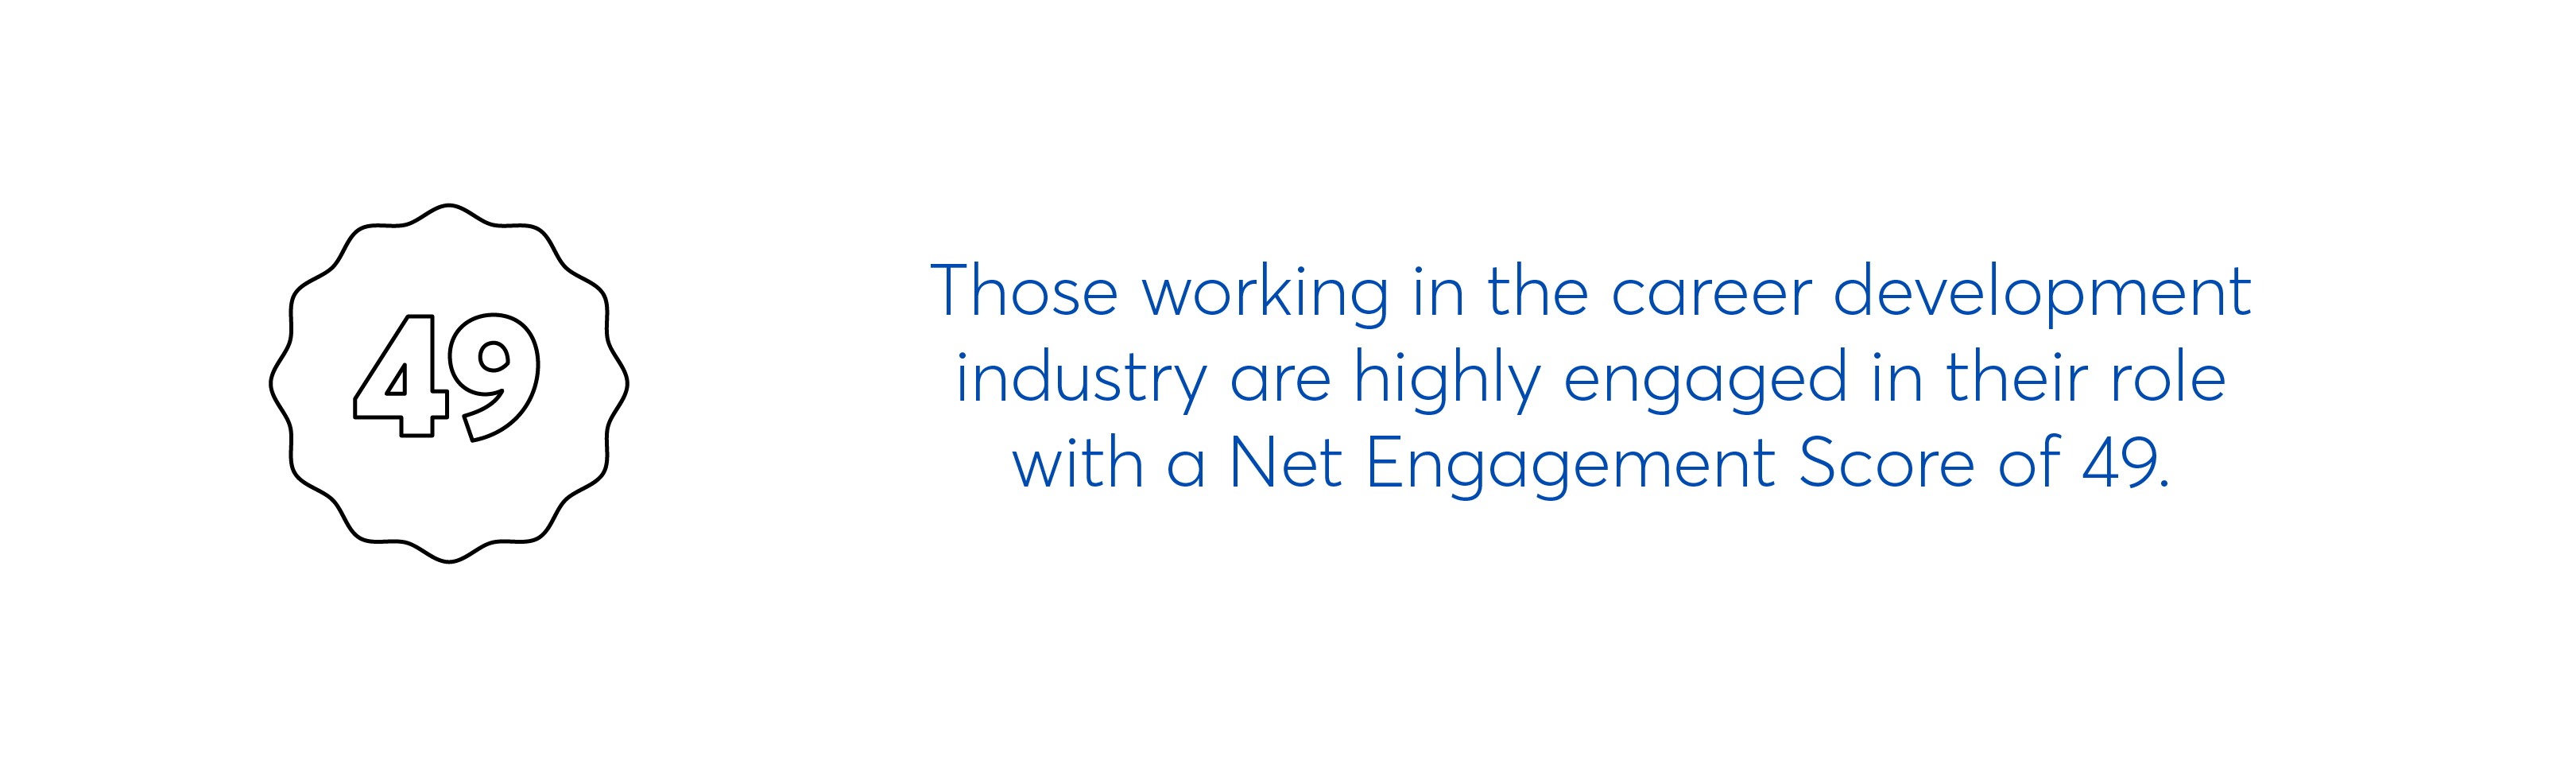 High engagement in the career development industry